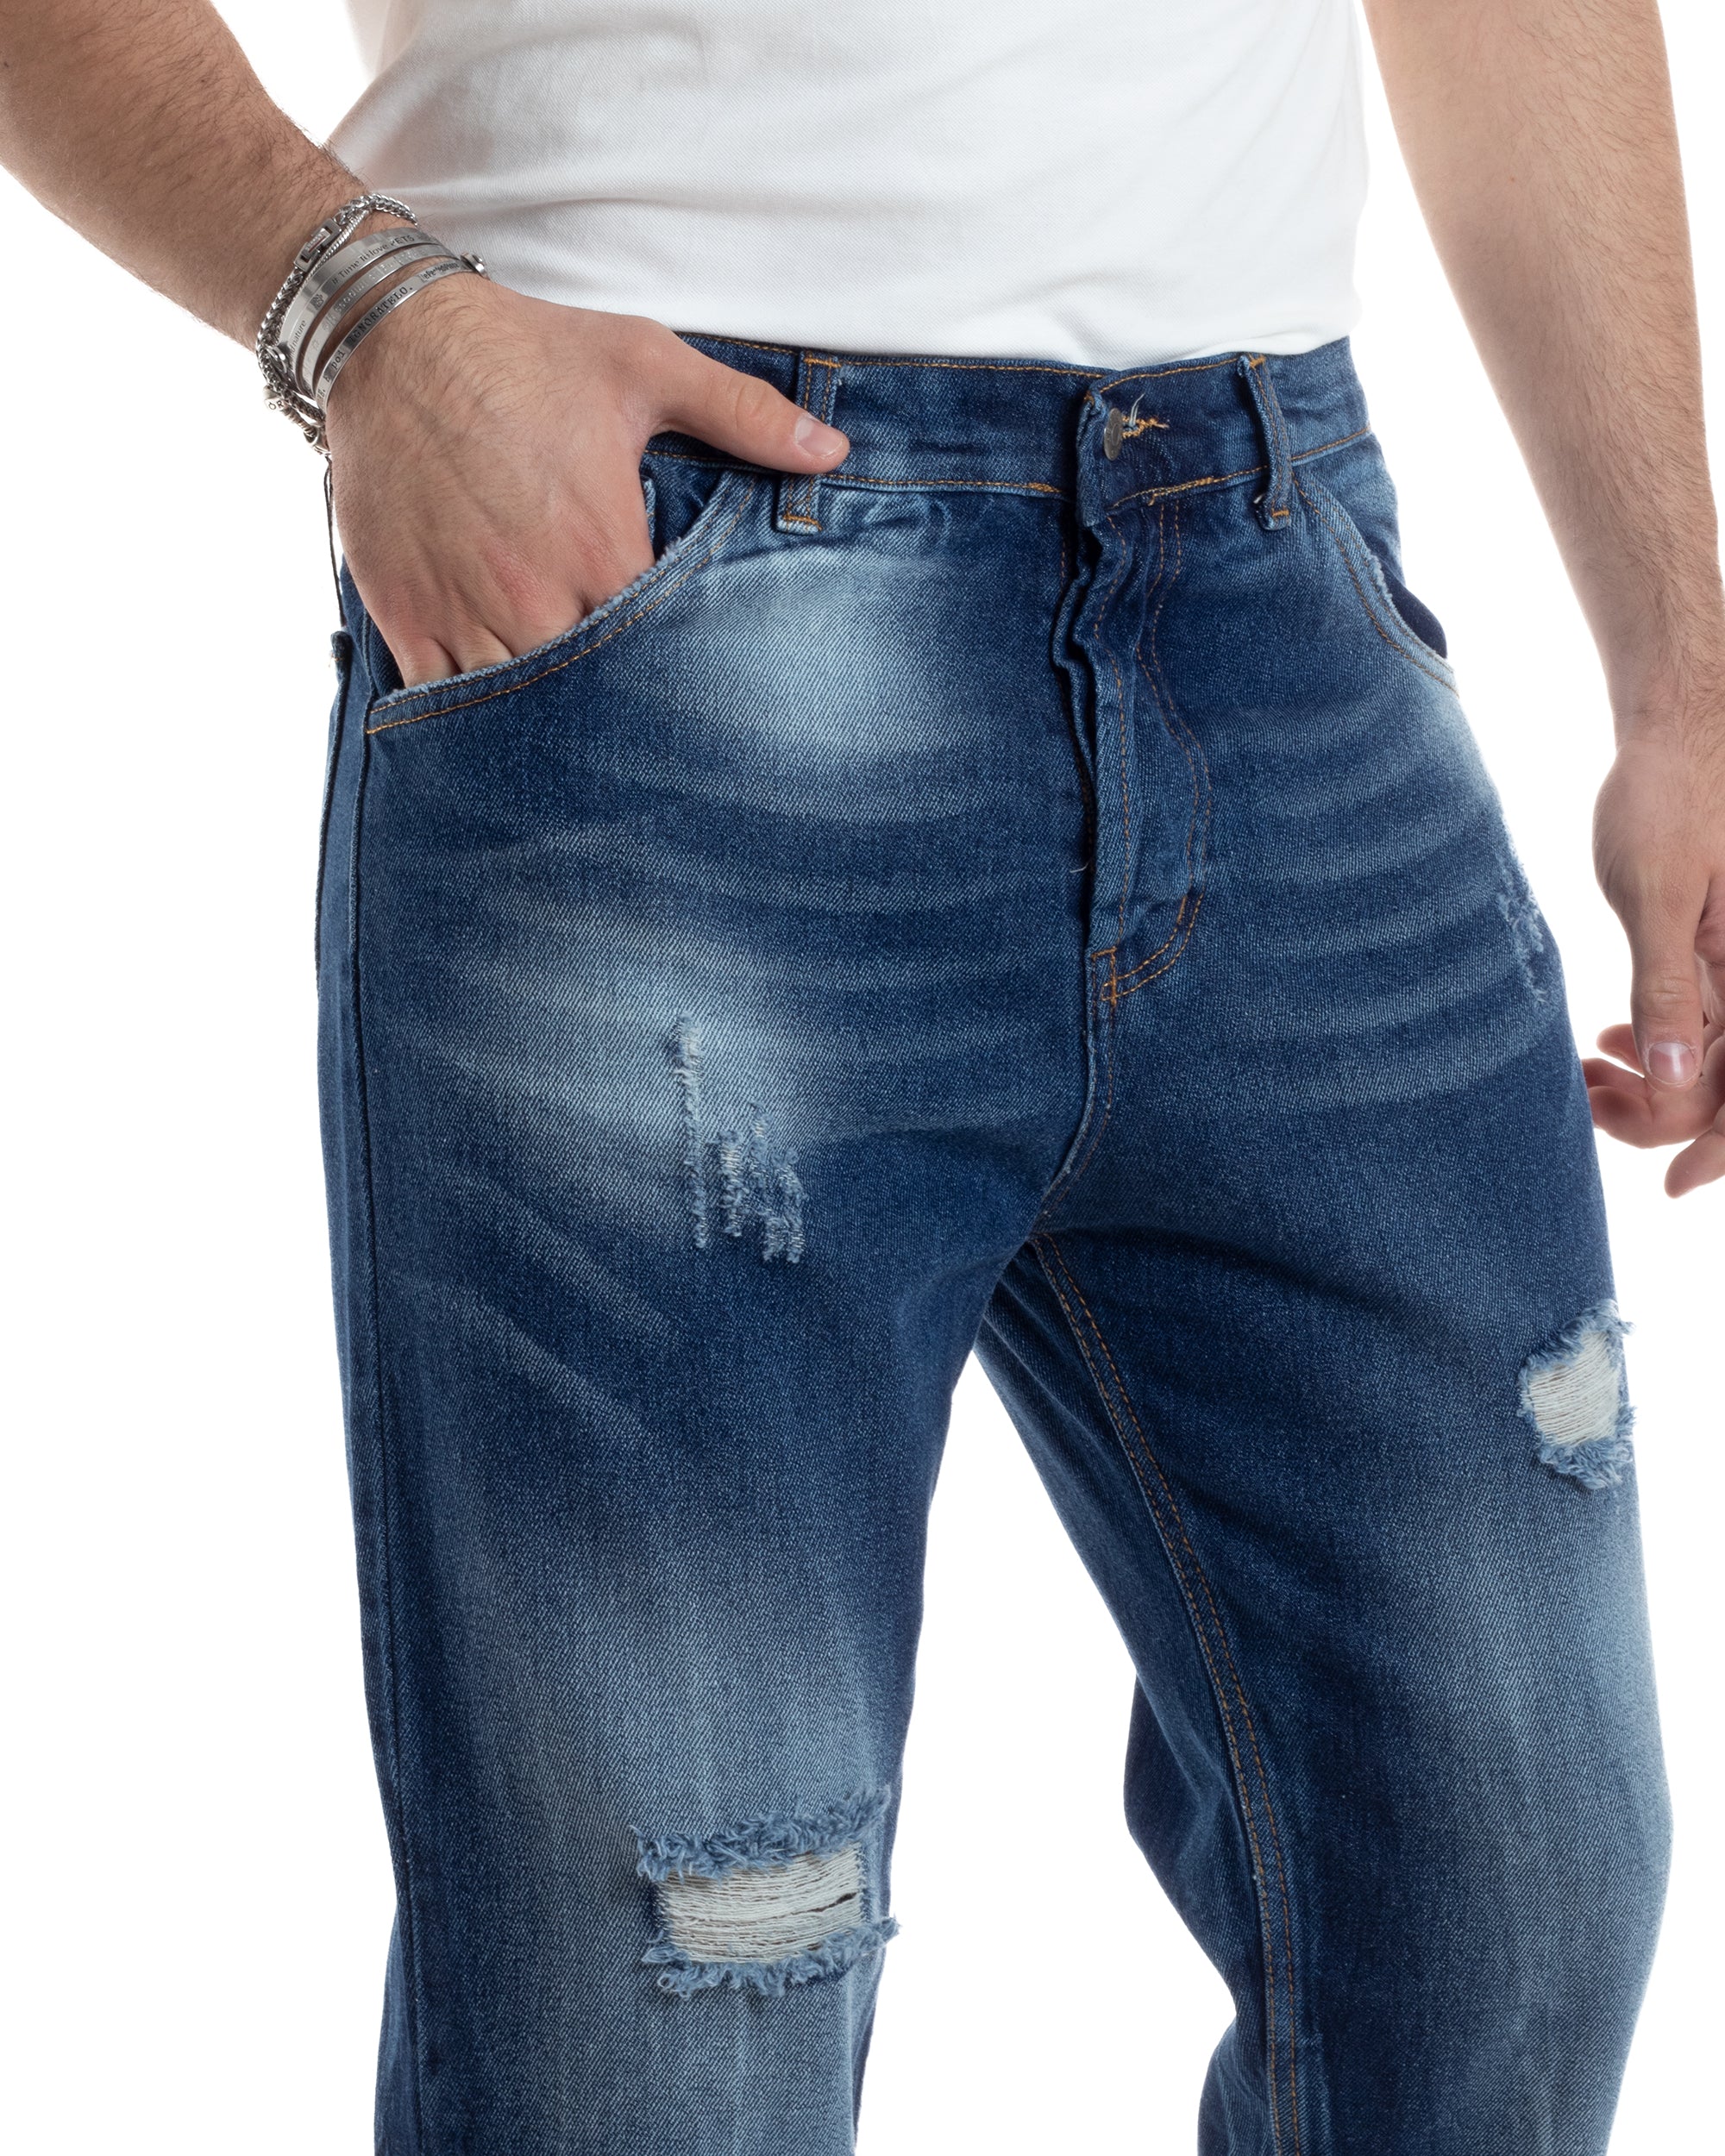 Men's Jeans Trousers Loose Fit Denim With Rips Five Casual Pockets GIOSAL-P5552A